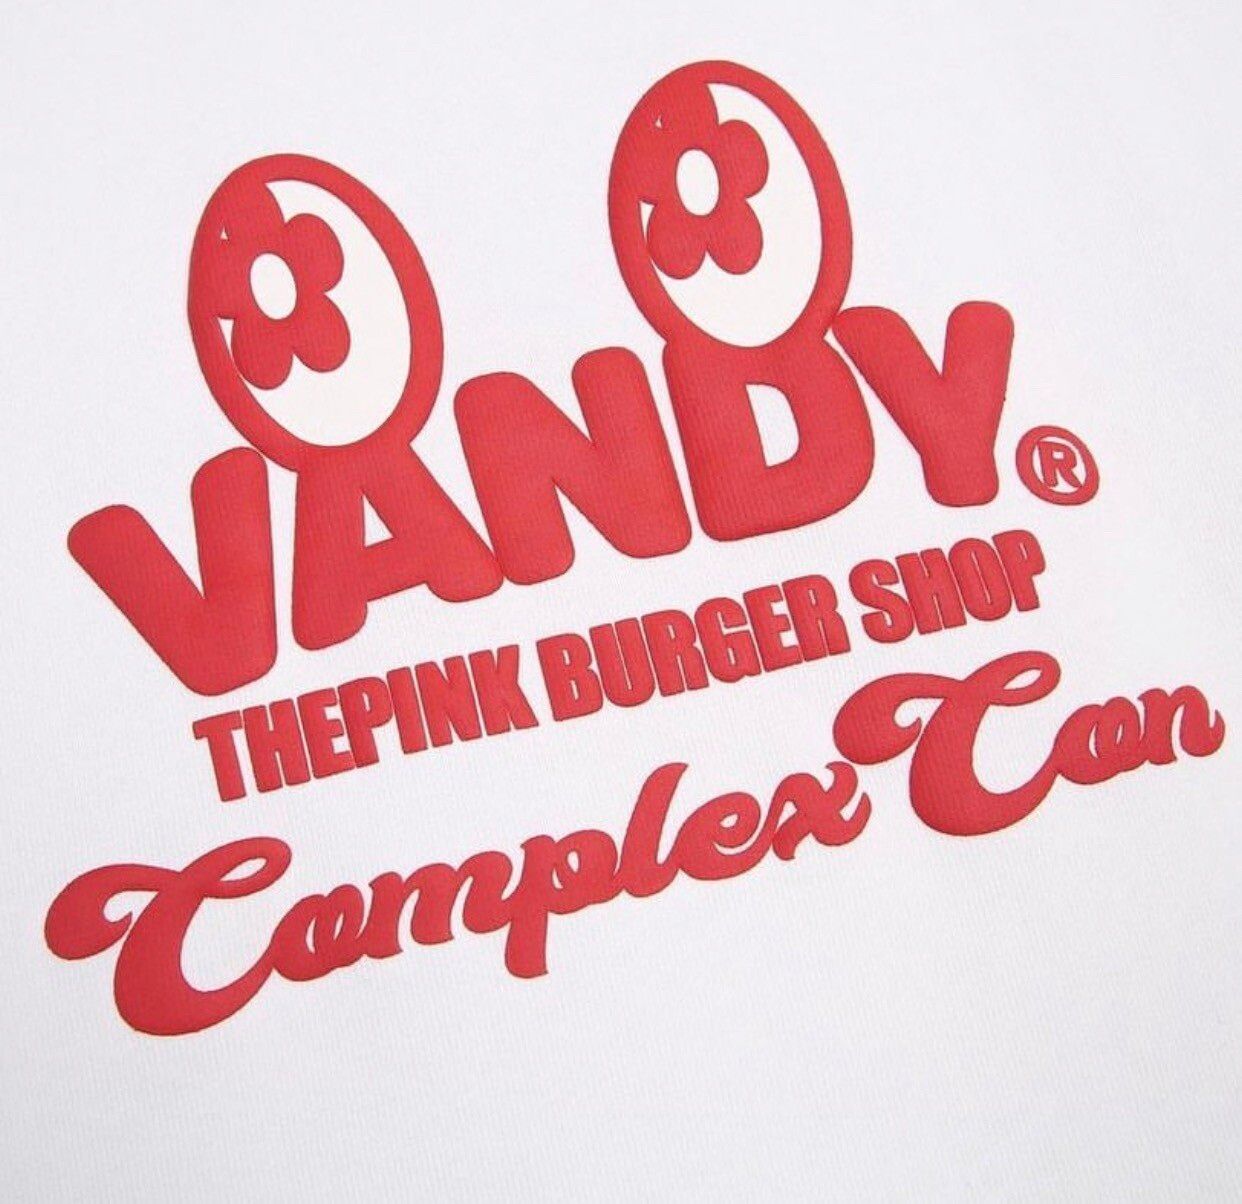 NWT VANDY THE PINK LIMITED EDITION Complexcon Tshirt from THEPINK BURGER  SHOP XL